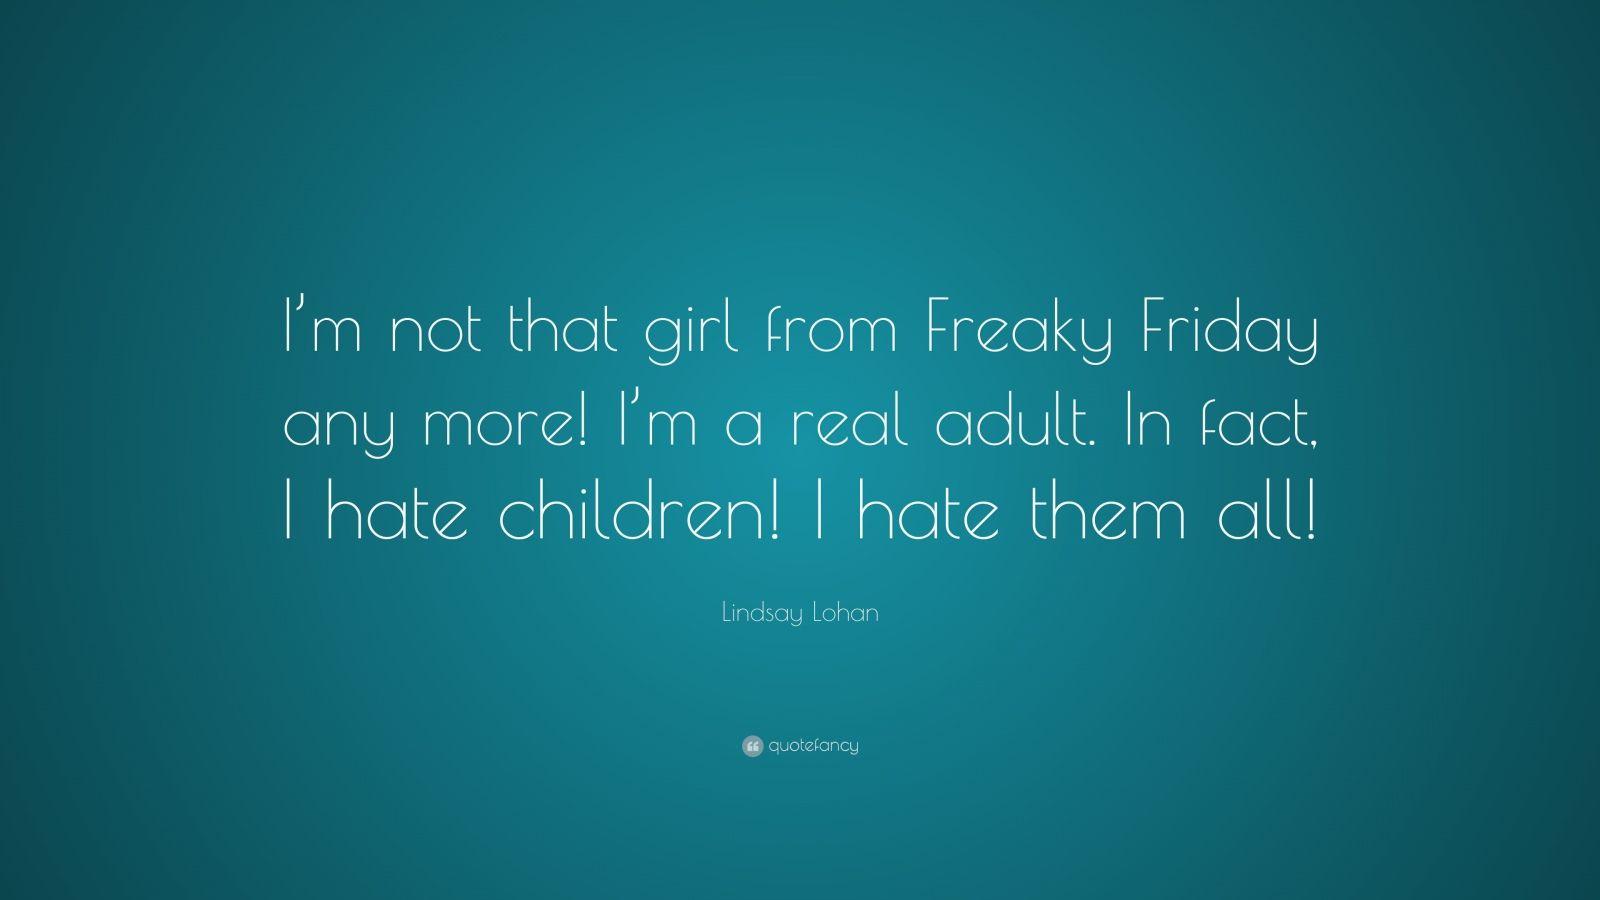 Lindsay Lohan Quote: “I'm not that girl from Freaky Friday